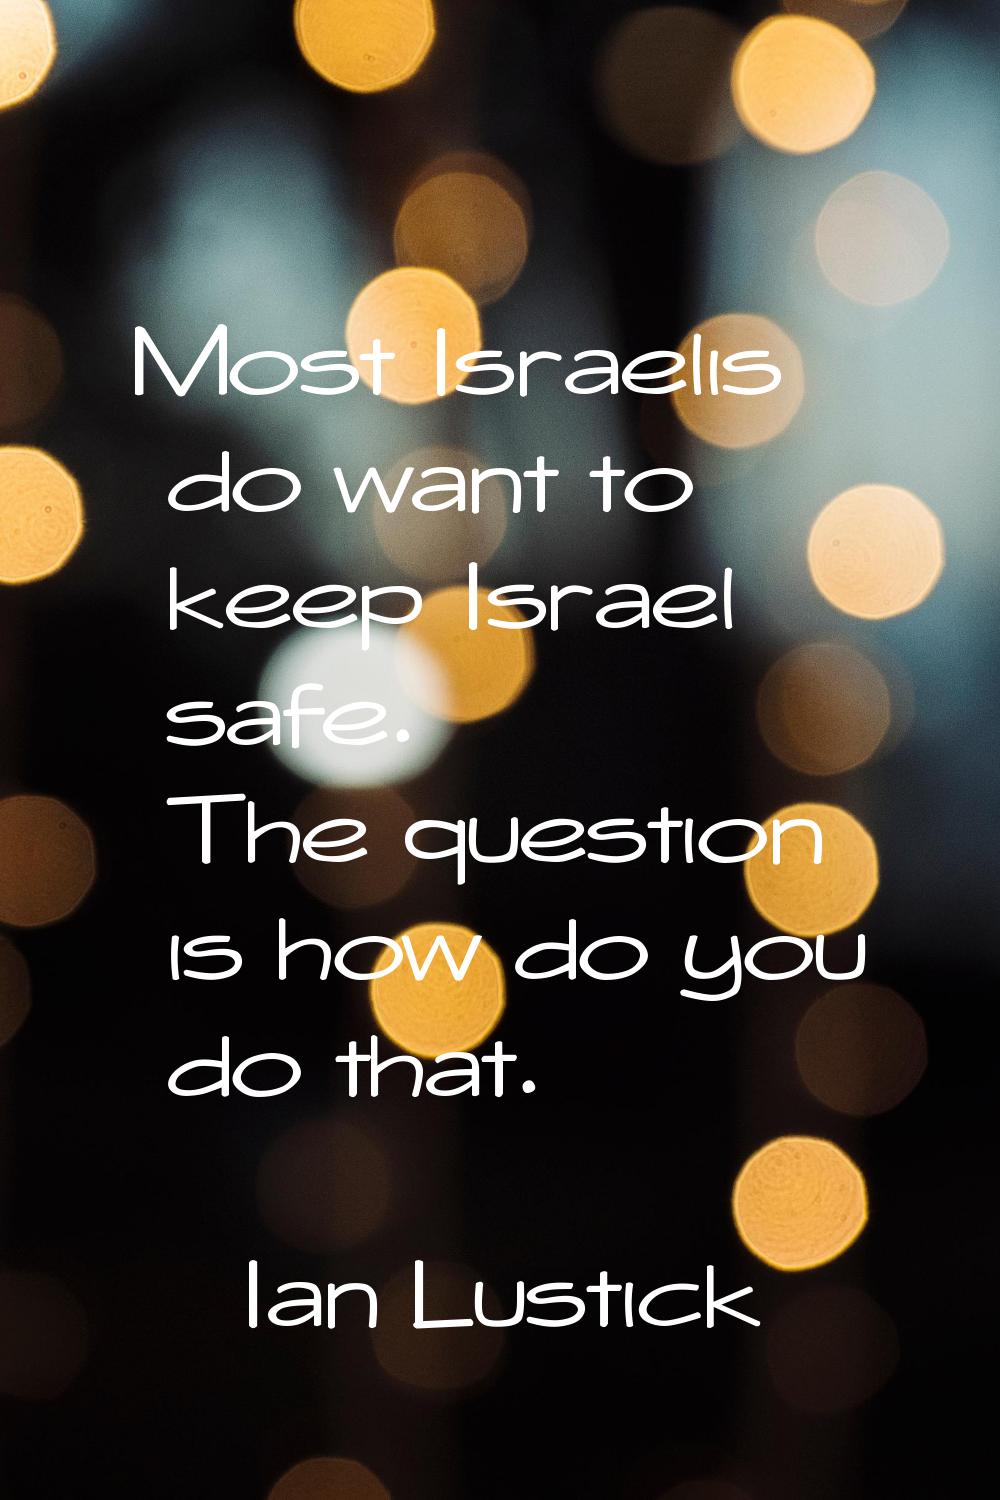 Most Israelis do want to keep Israel safe. The question is how do you do that.